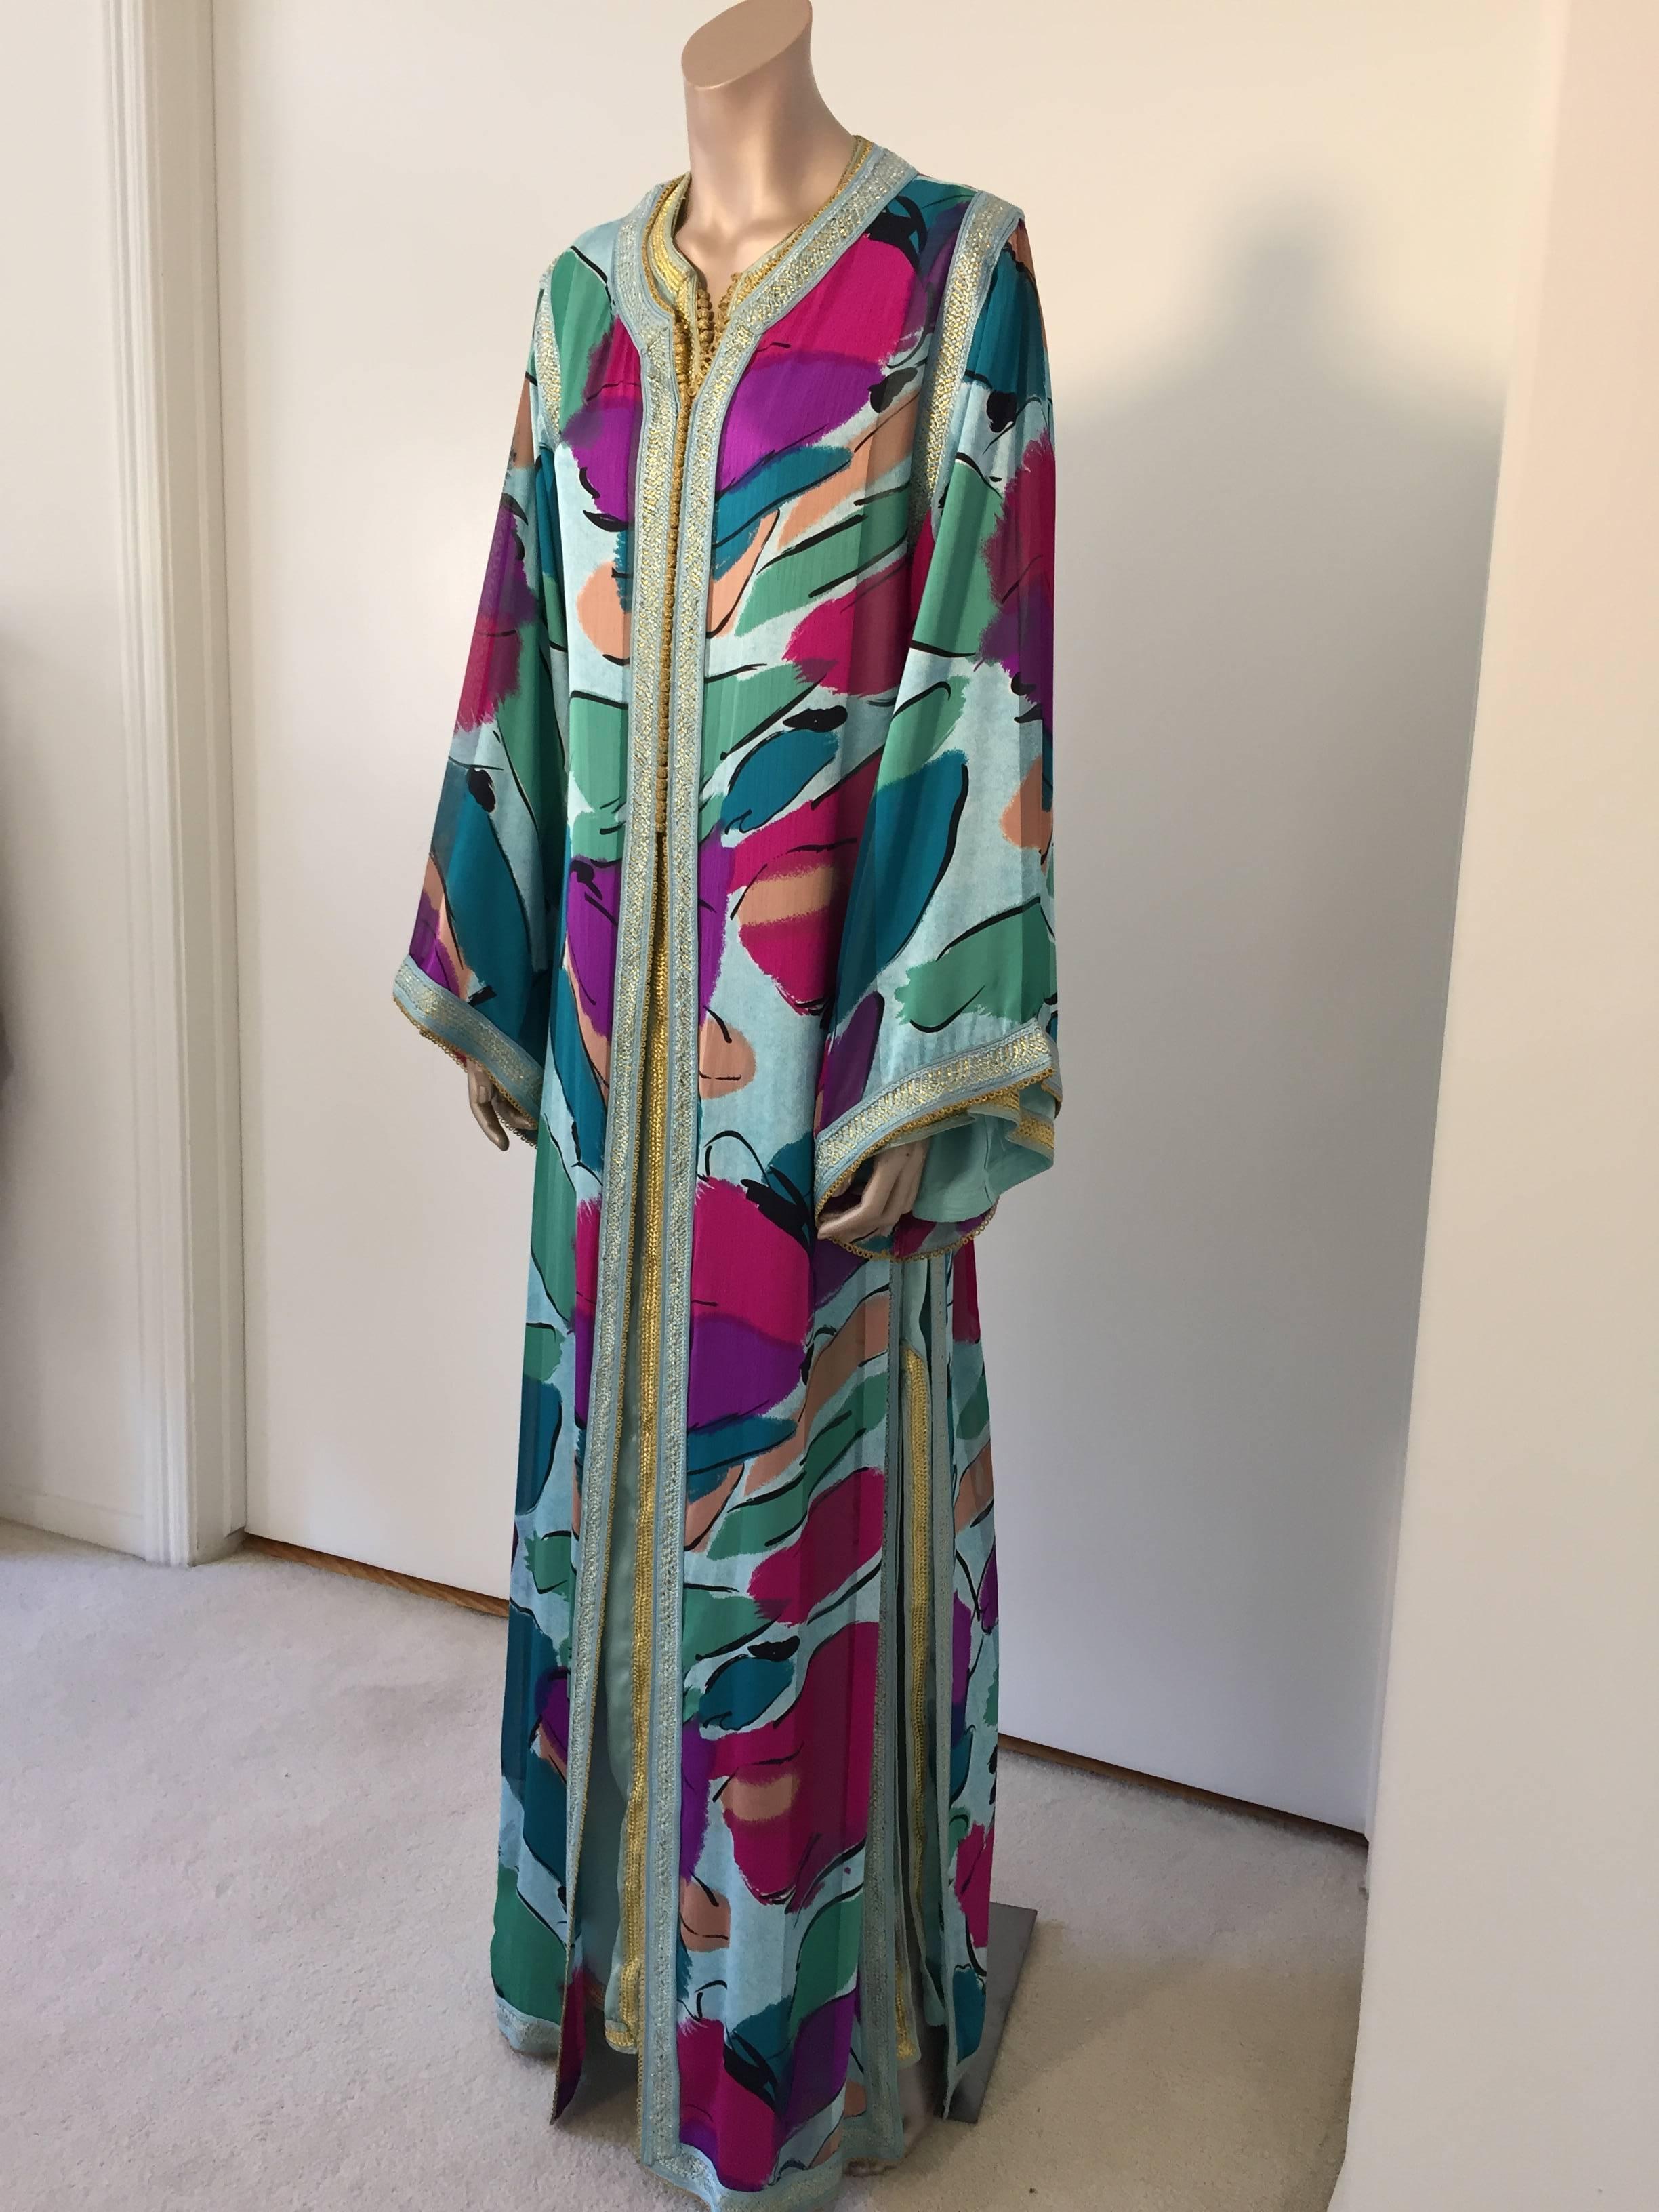 Elegant Moroccan luxury silk caftan gown two pieces set.
This is a two pieces set, a turquoise maxi dress with a silk top polychrome and turquoise embroidered trim.
You can wear the two pieces together or separate.
Silk fabric in Emilio Pucci style